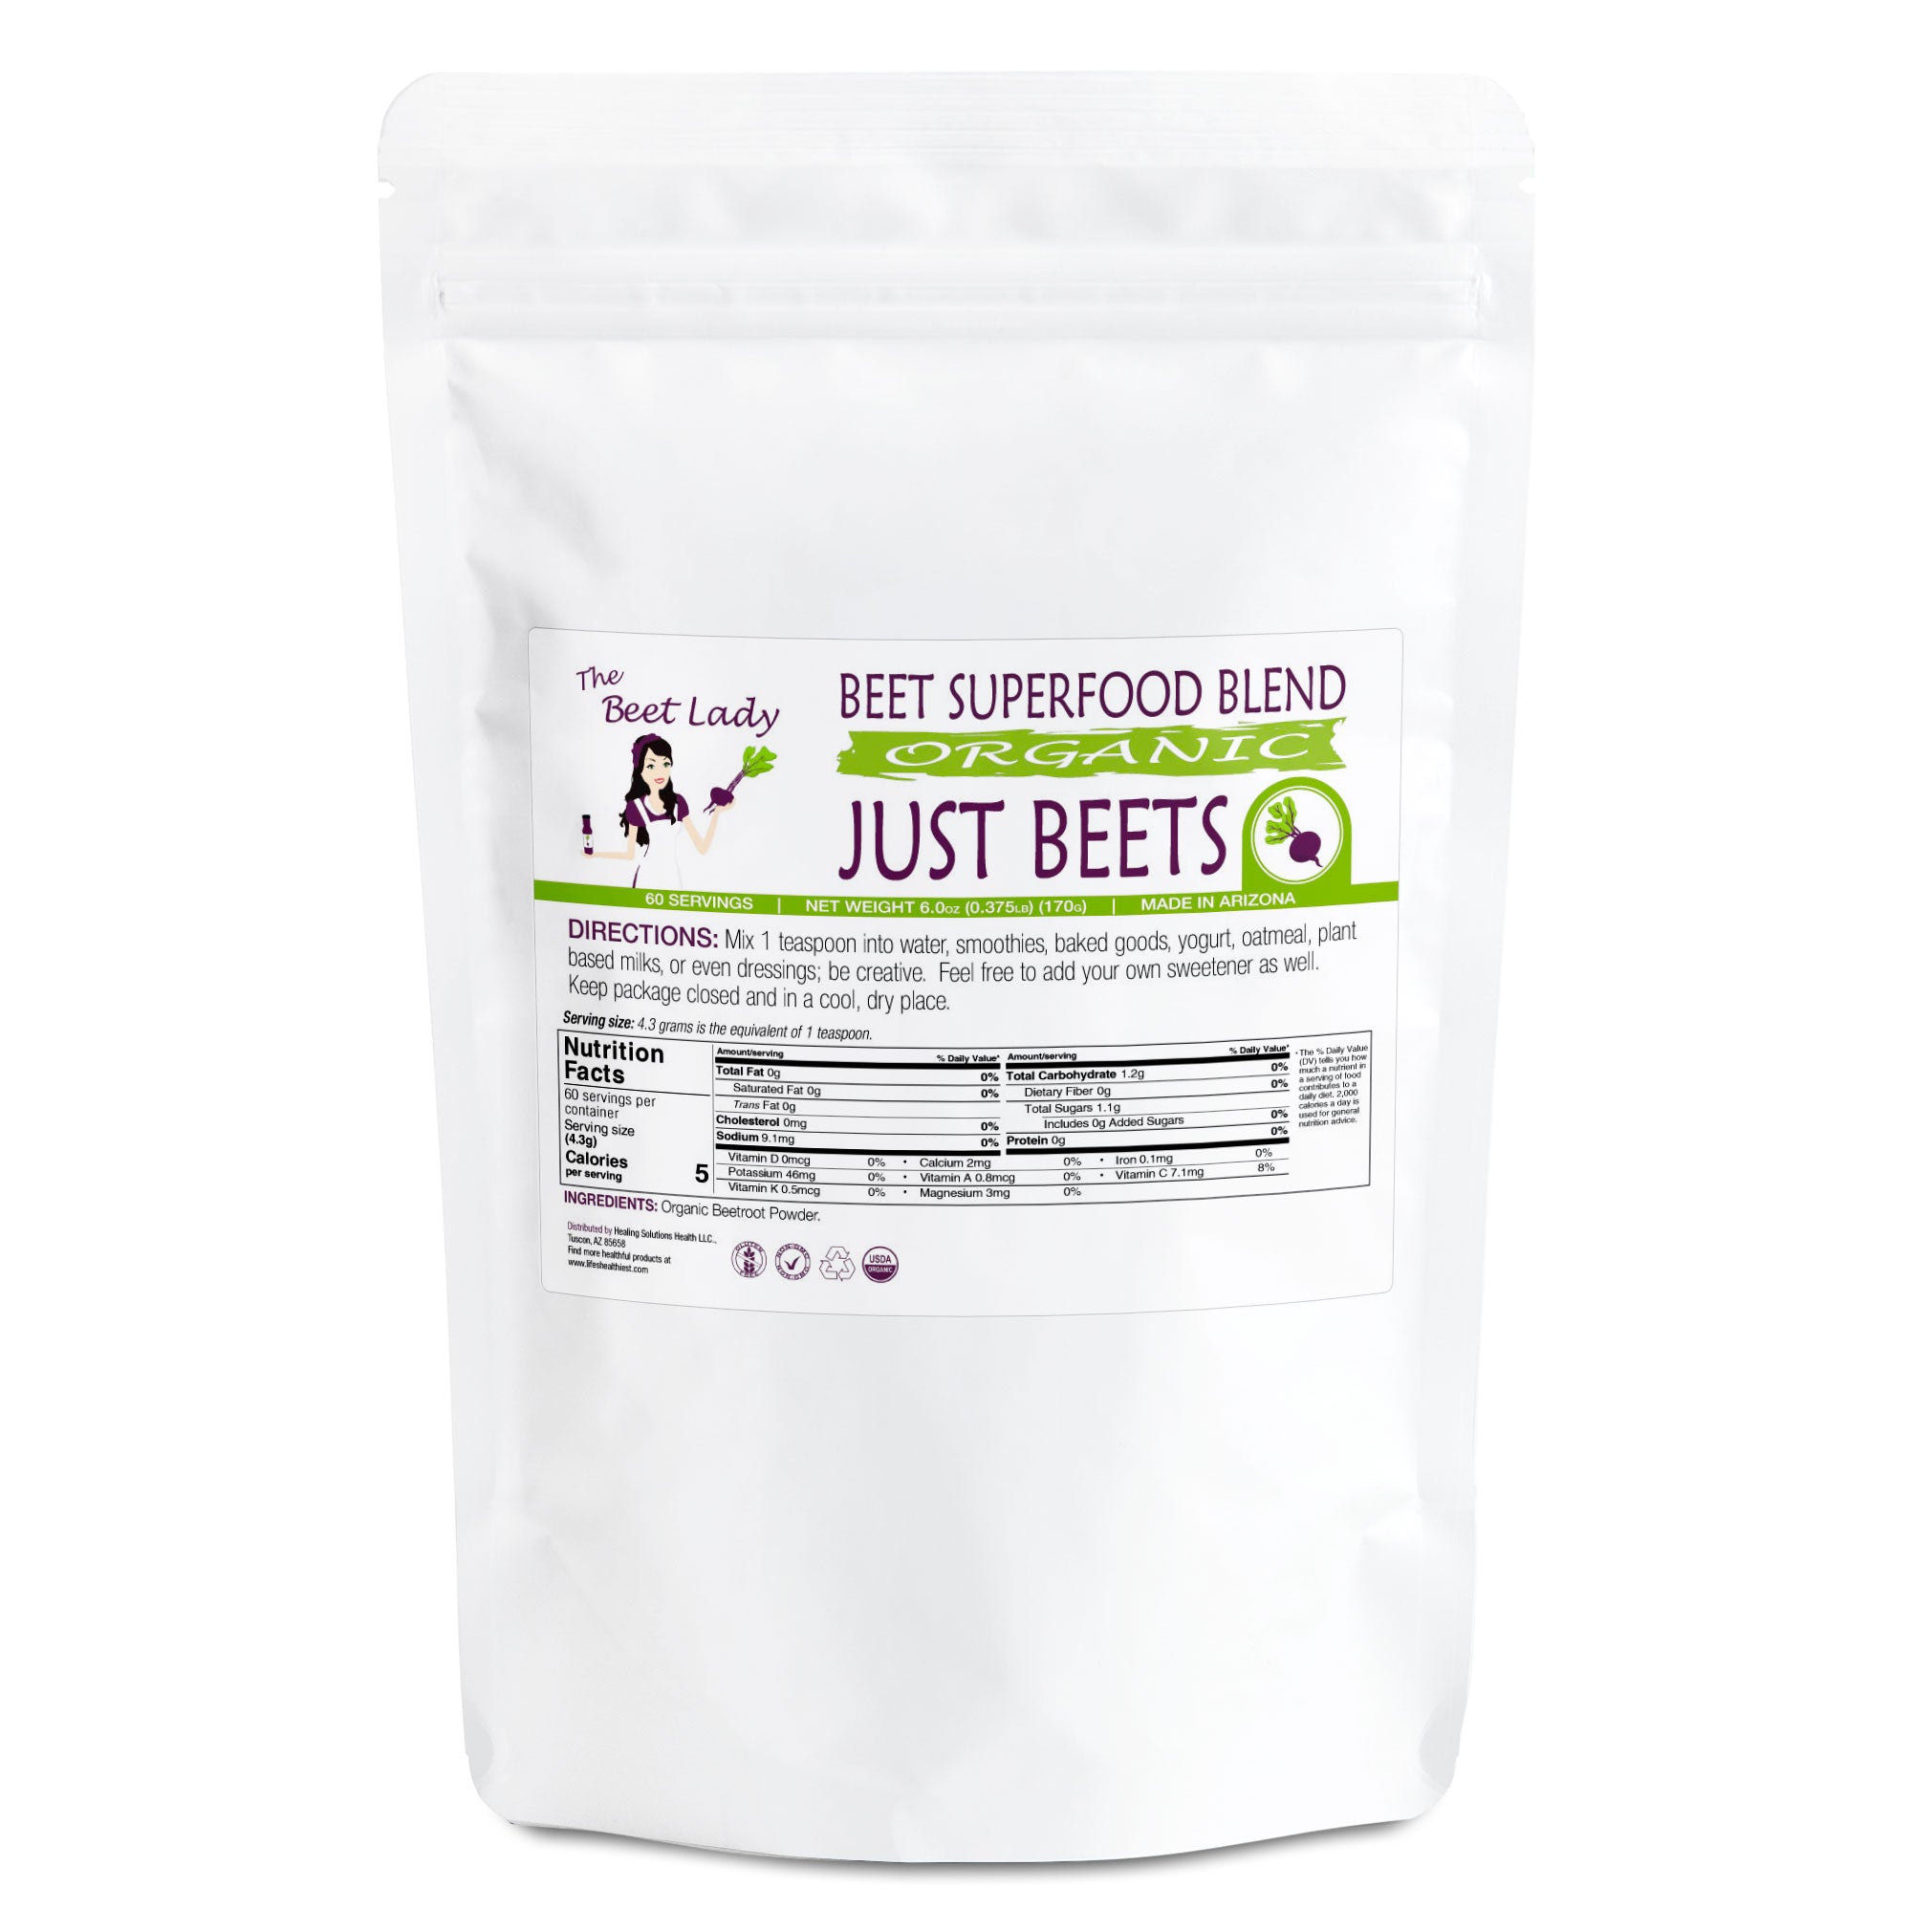 The Beet Lady JUST BEETS Beet SuperFood powder and capsules.  Organic, plant-based, non-GMO-2